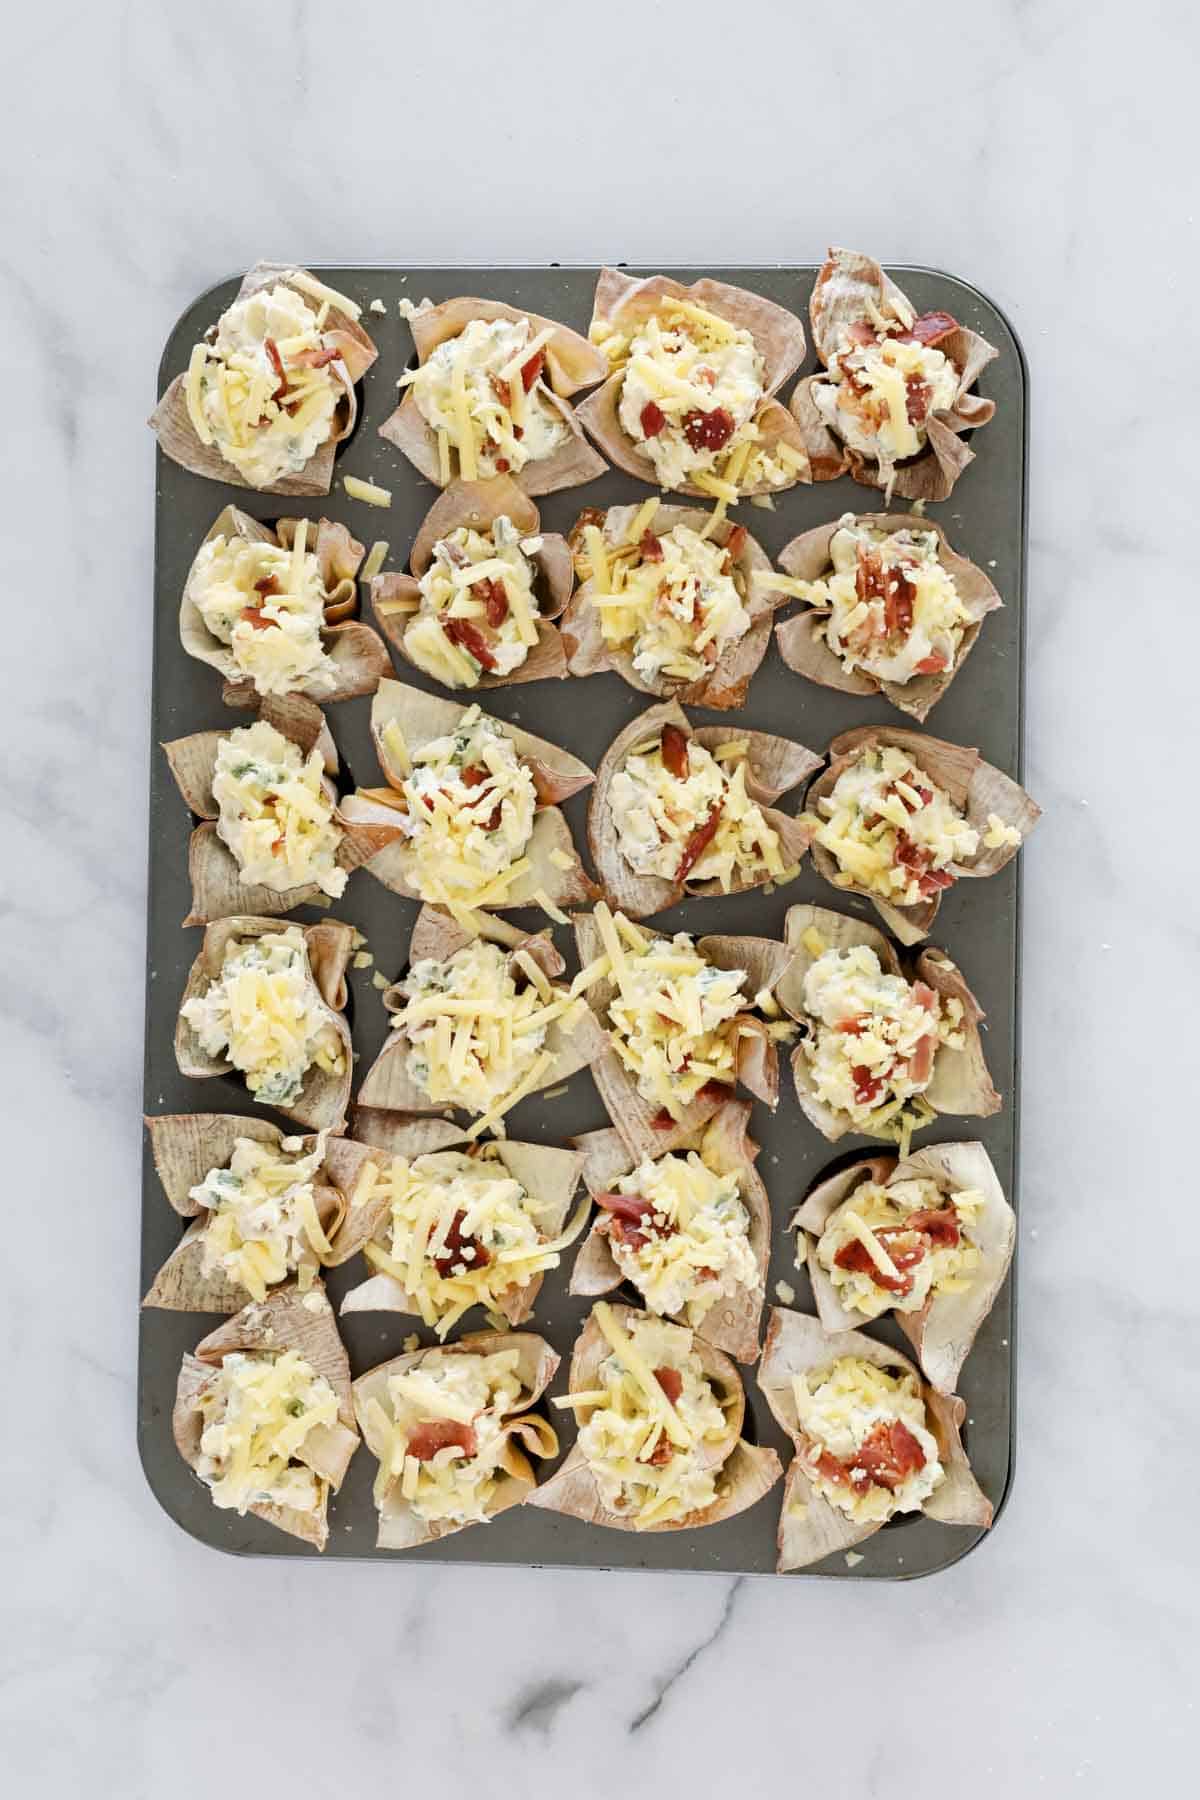 Unbaked spicy jalapeno wonton cups on a baking tray.